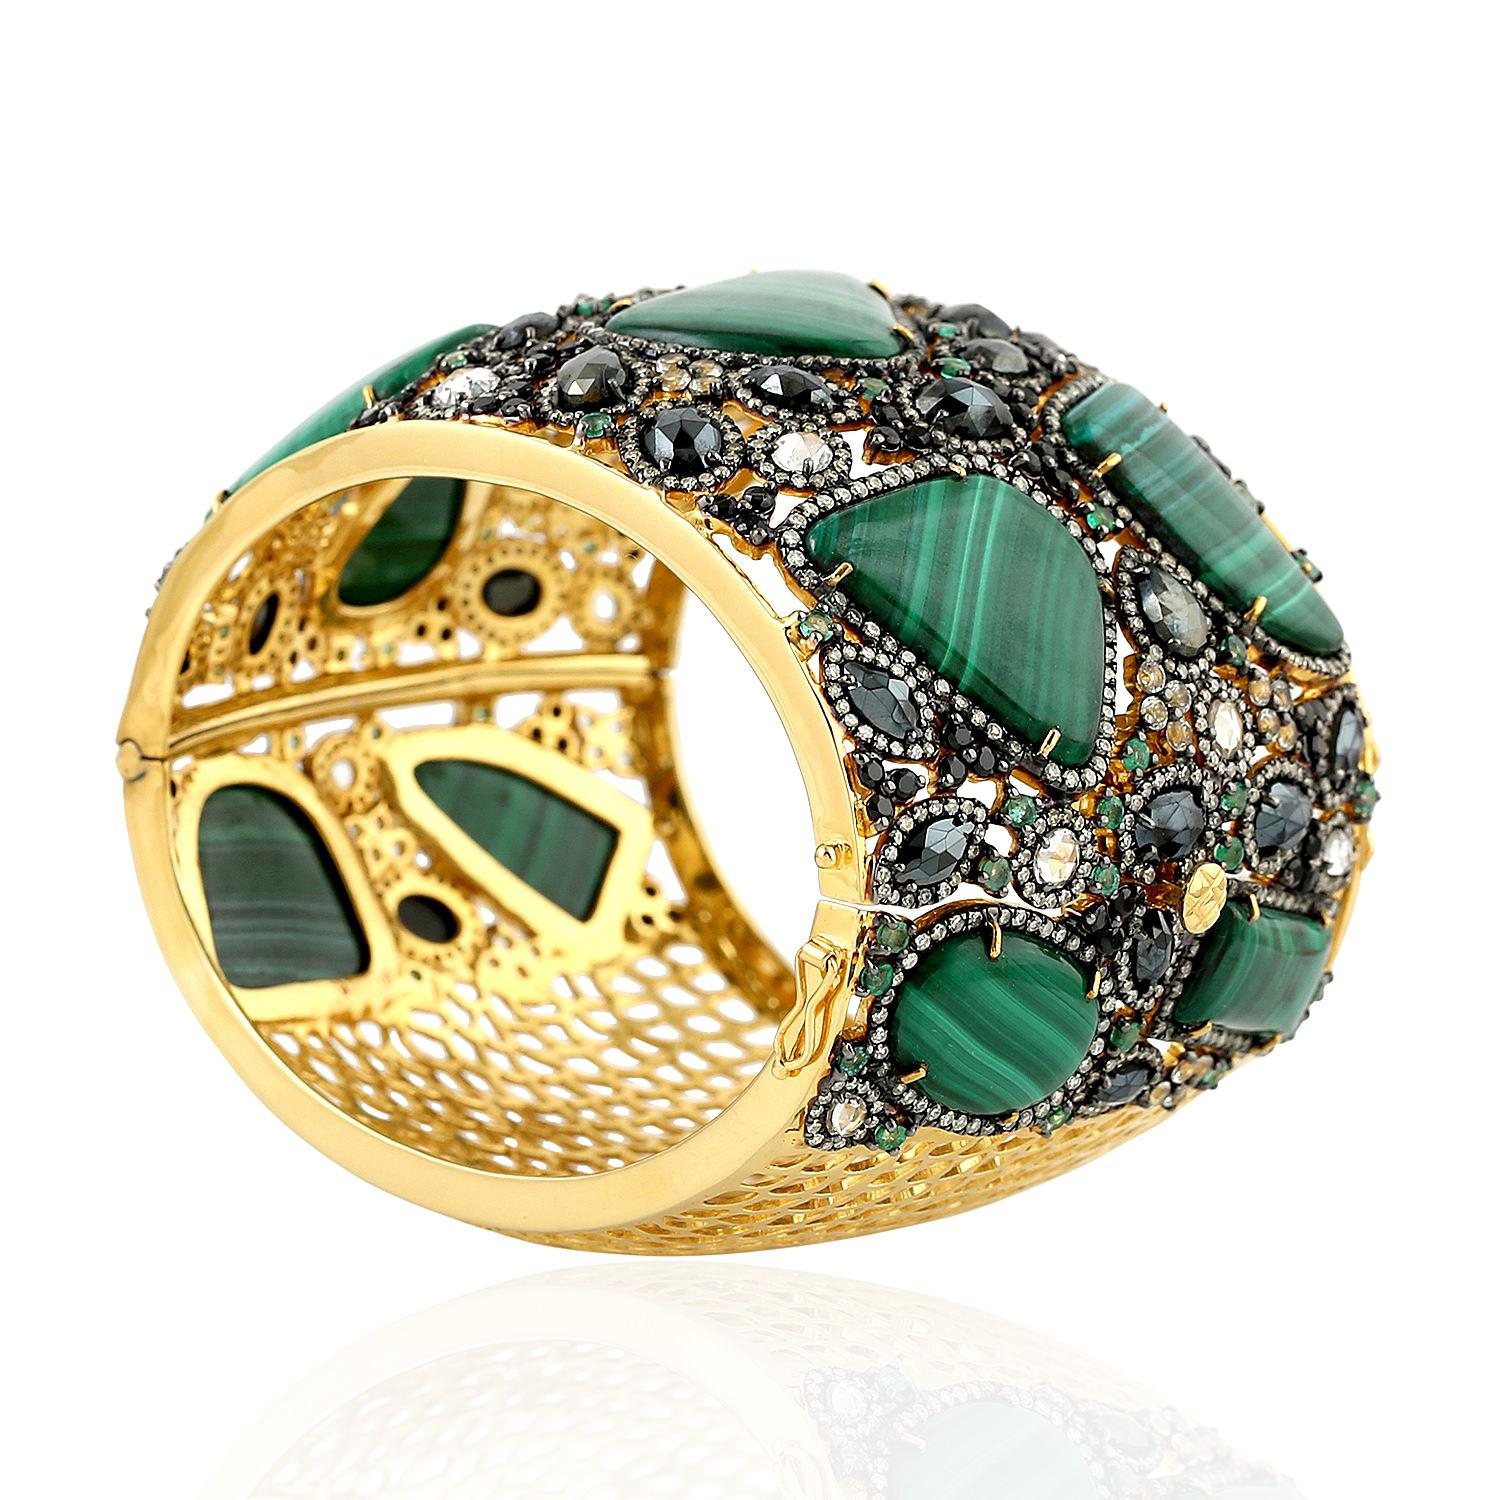 Bold and beautiful sliced malachite decorated with diamonds emeralds in mosaic style. This bracelet cuff is broad and close with a tongue clasp on side.


18KT: 5.960gms
Diamond: 7.02cts
SiIver: 67.128gms
EMERALD: 2.25cts
MALACHITE: